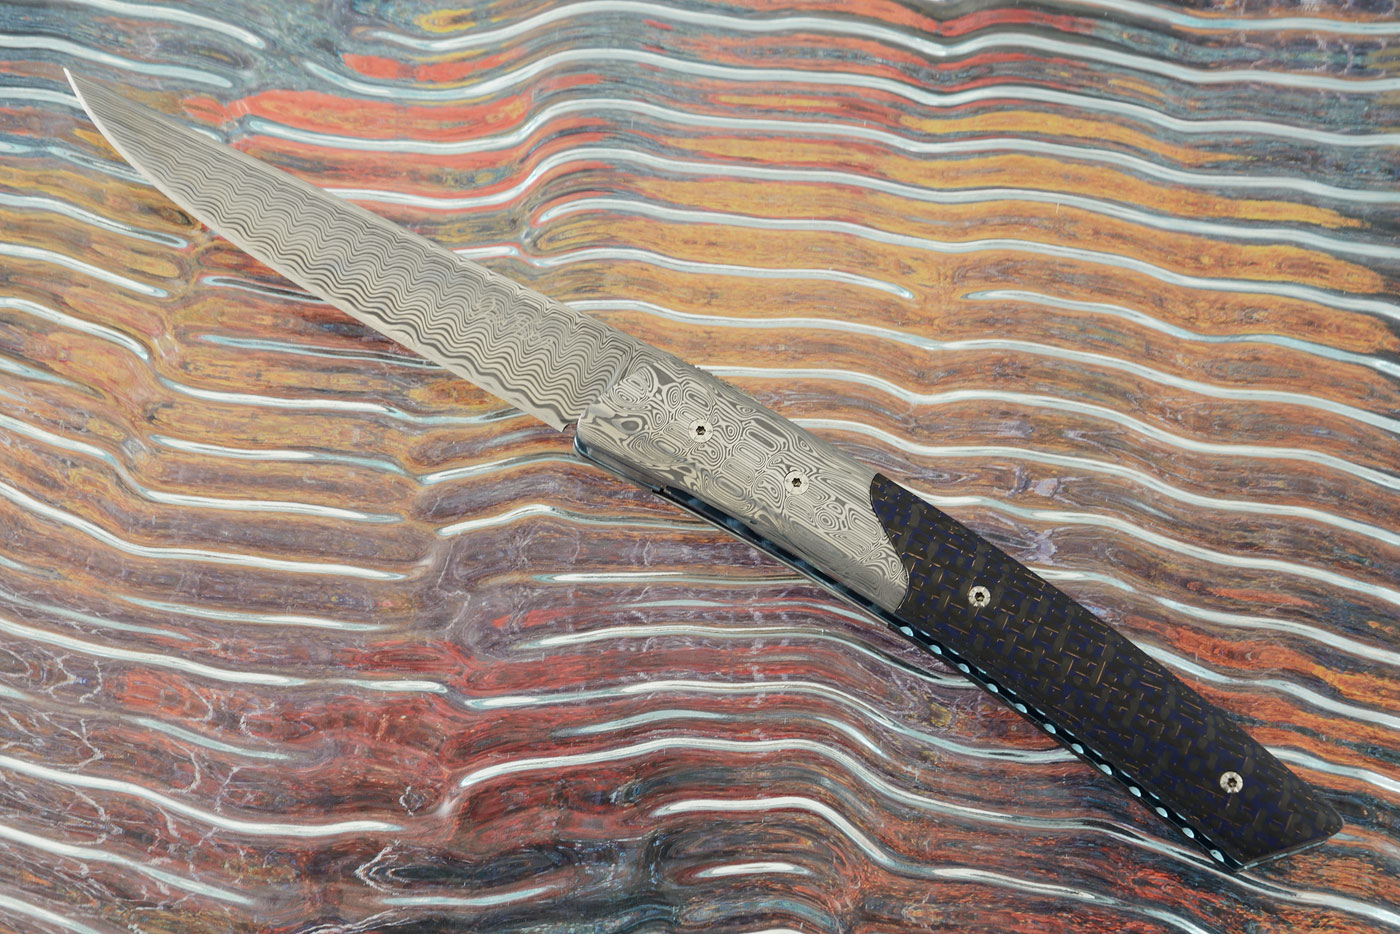 Thiers 9 Front Flipper with Damasteel and Blue Lightning Strike Carbon Fiber